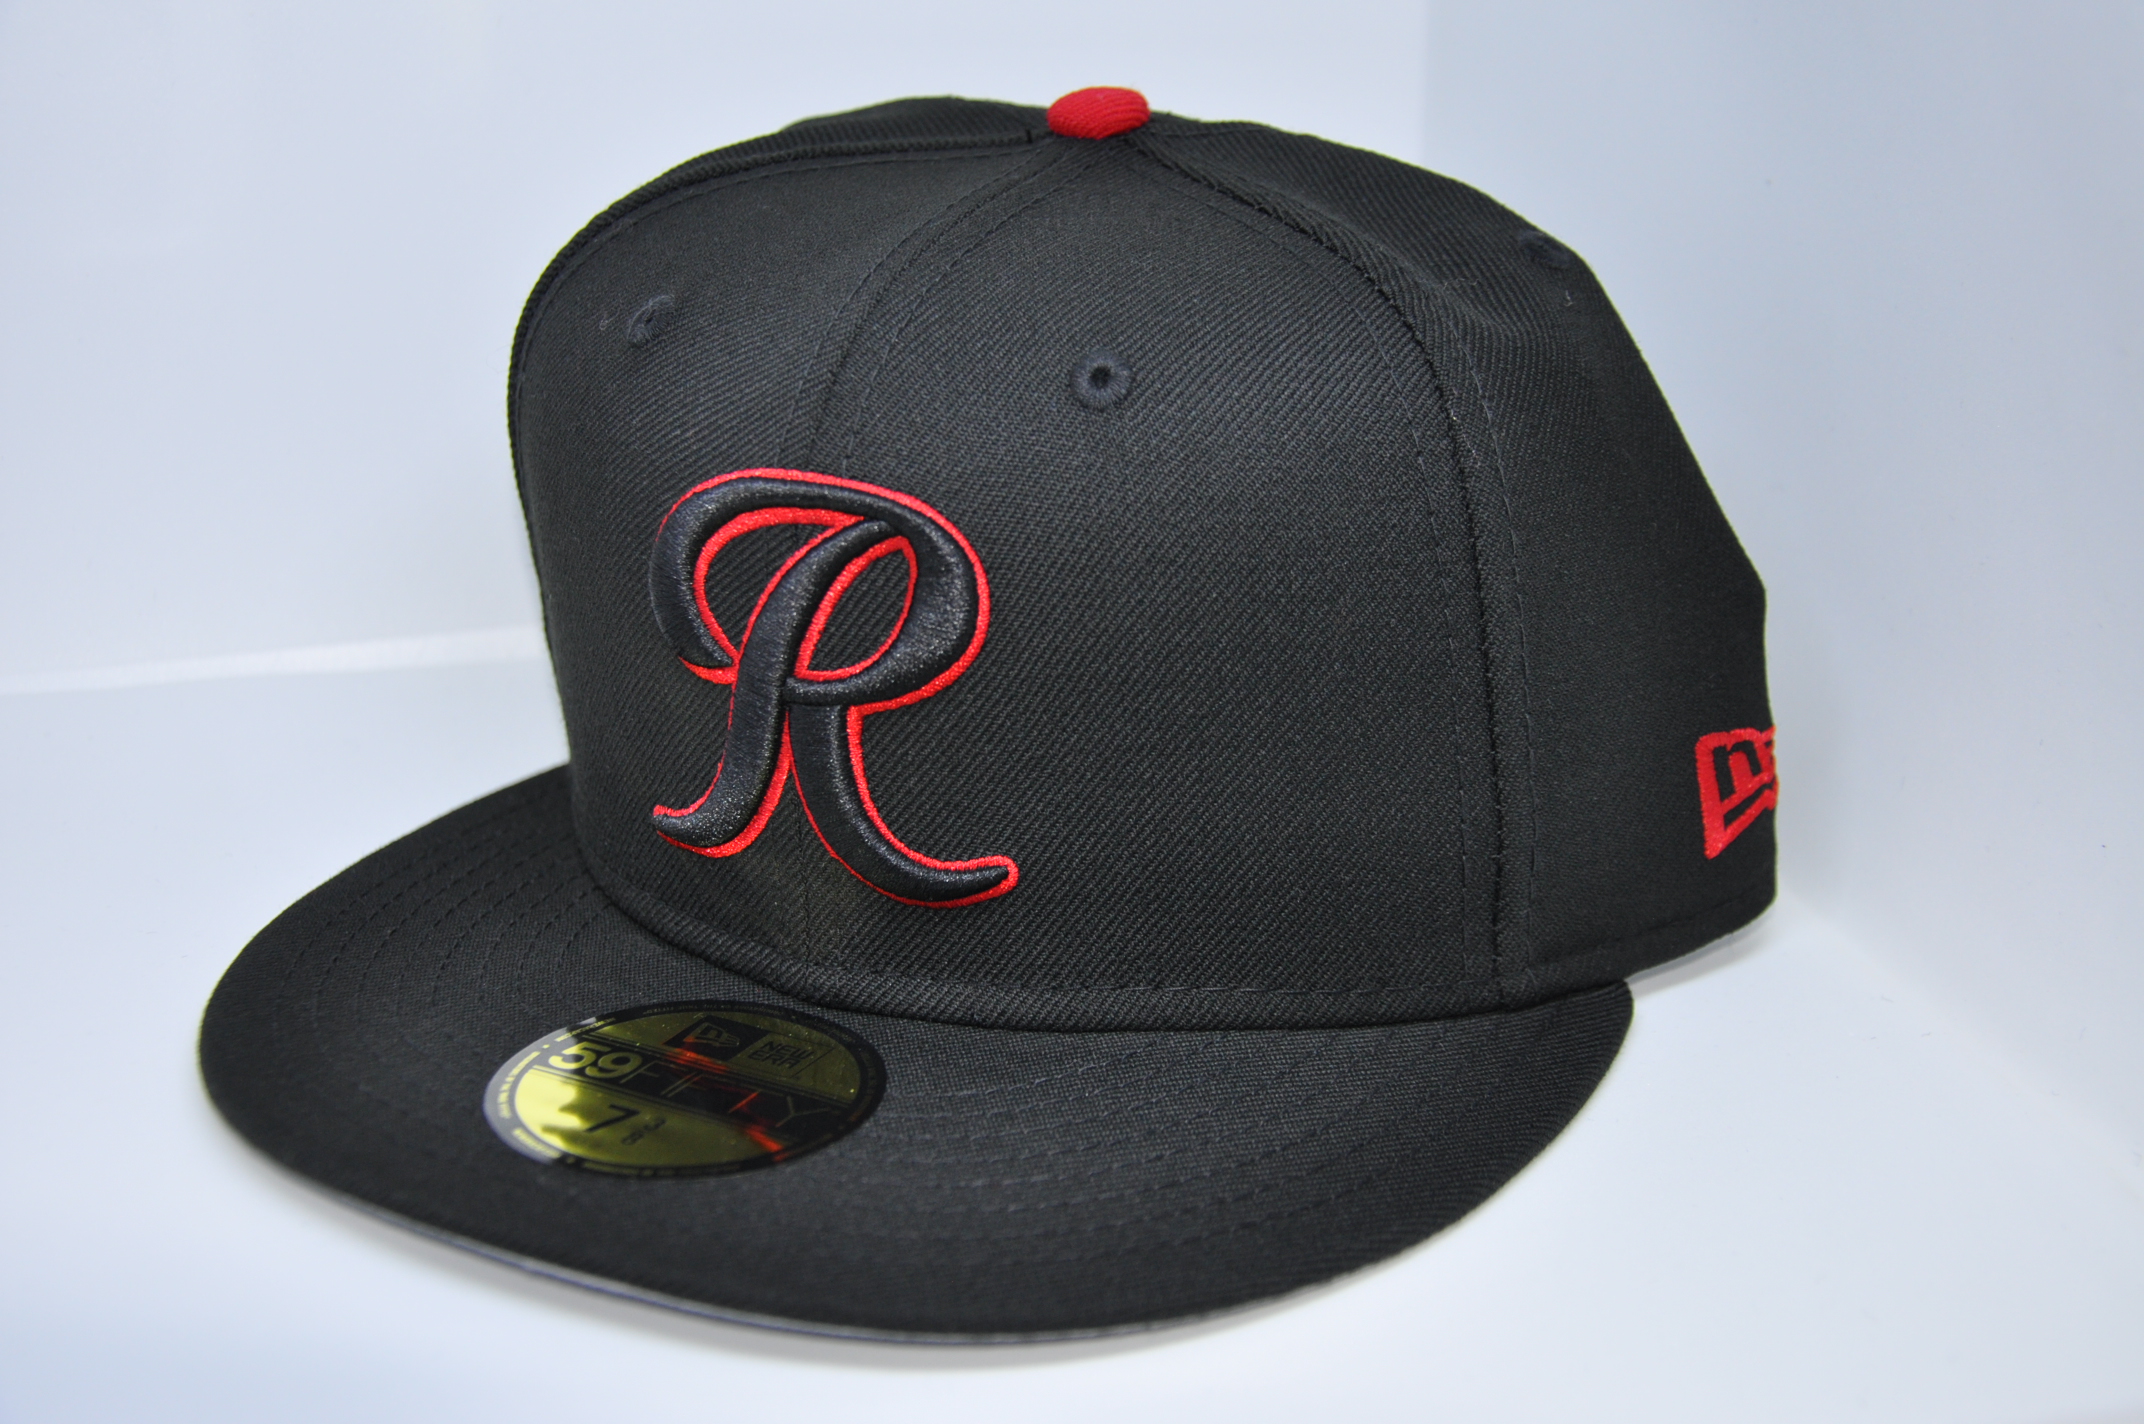 Tacoma Rainiers New Era All Black With Red Outline Around The Letter R 59fifty Fitted Hat Hatstop